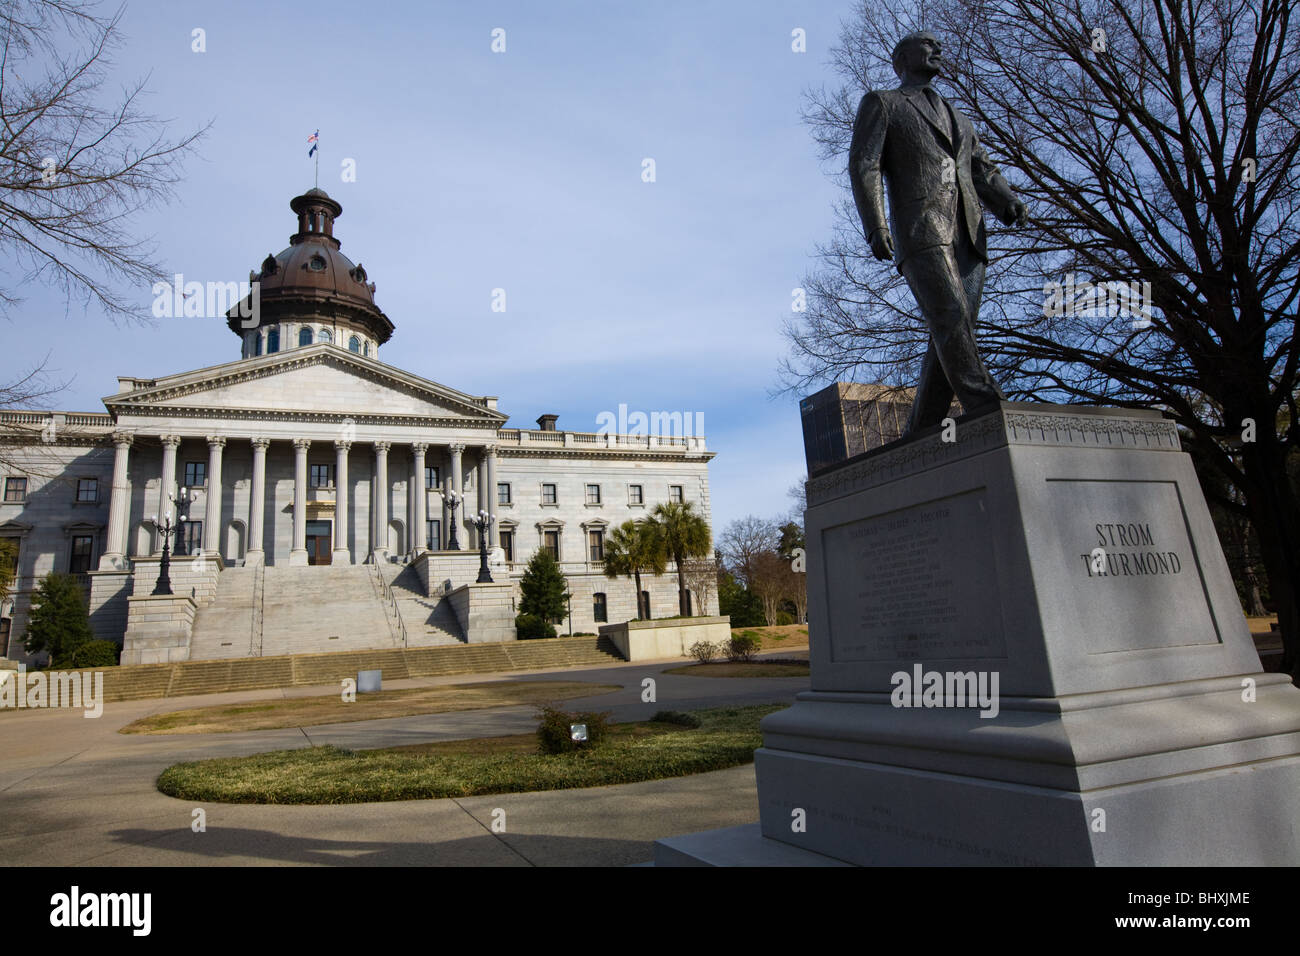 State Capitol Building fronted by statue of Strom Thurmond, Columbia, South Carolina Stock Photo